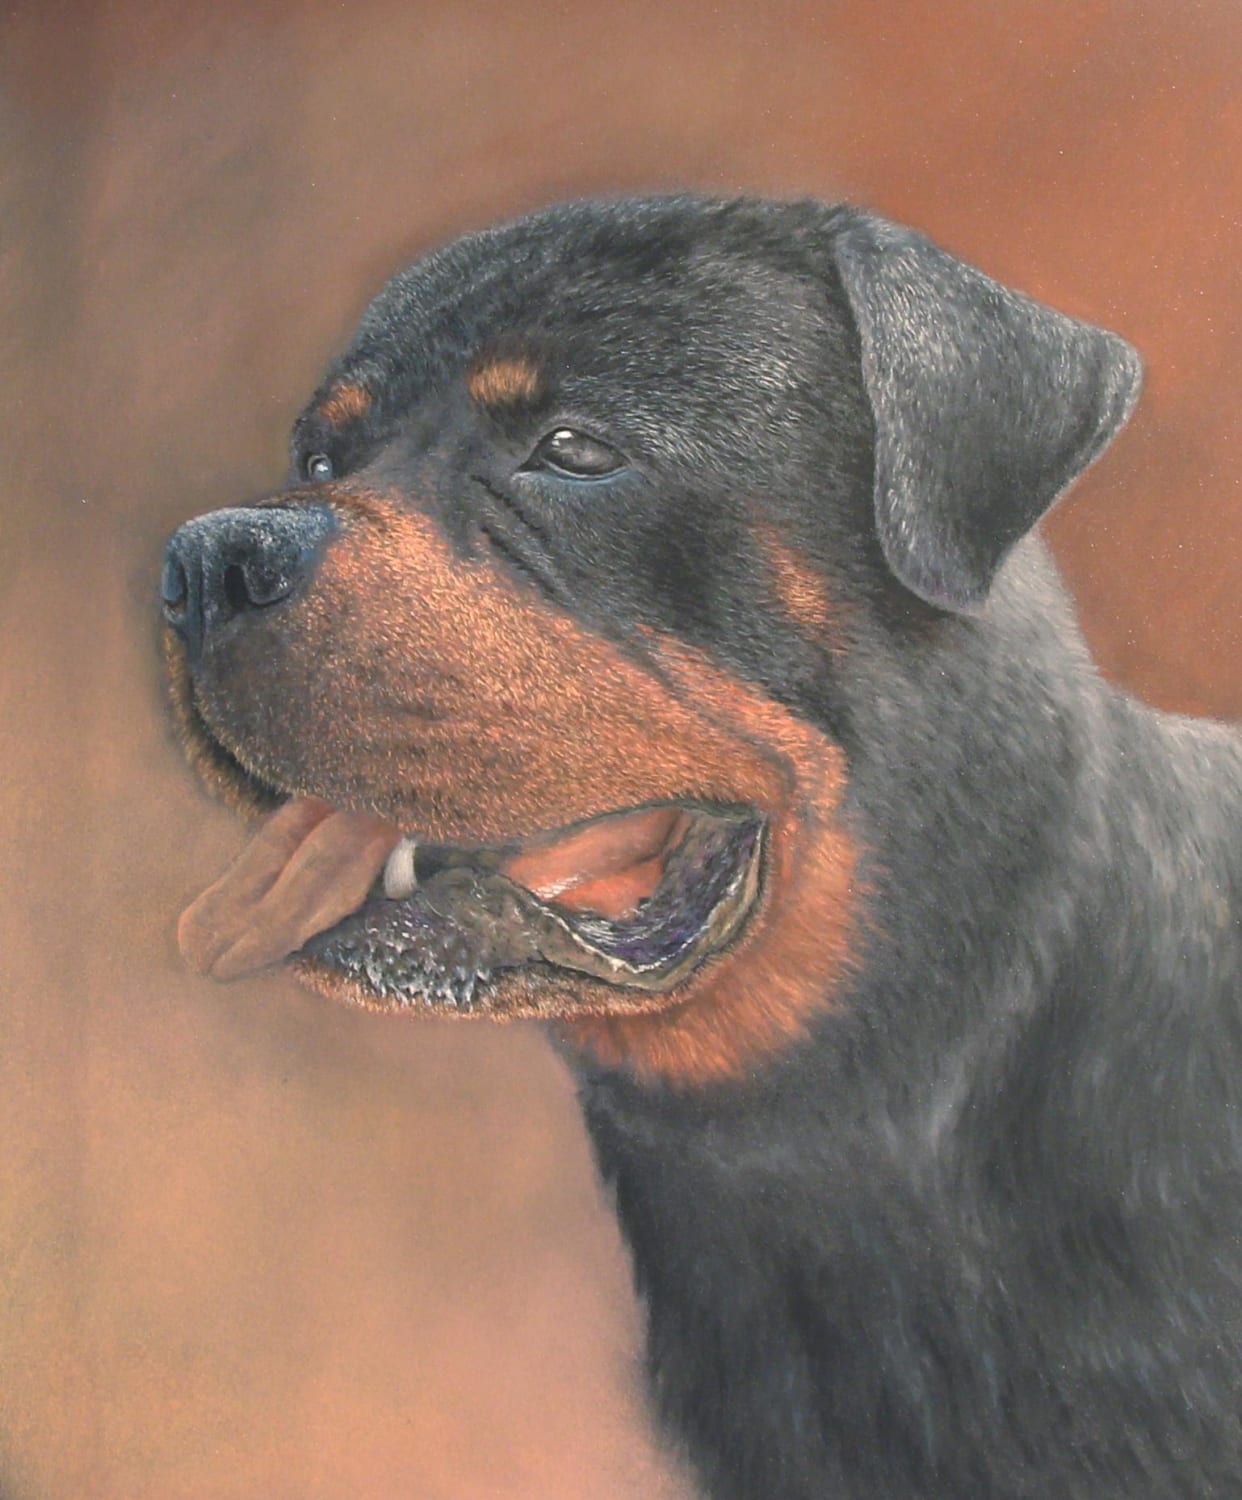 Rottweiler puppy. Commisioned piece I finished today. Hope you like it.